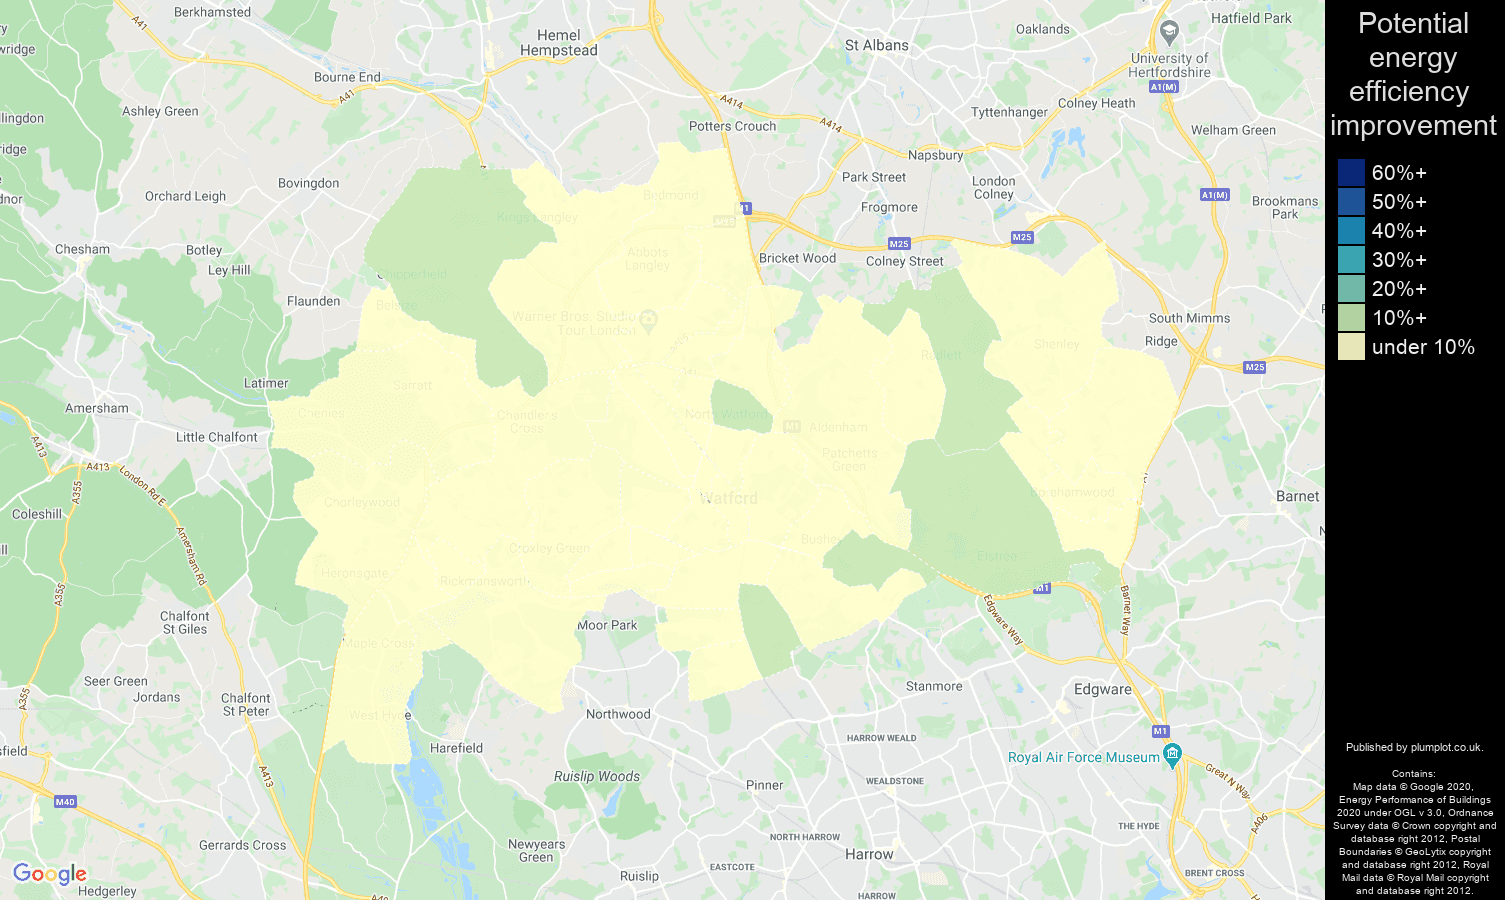 Watford map of potential energy efficiency improvement of flats